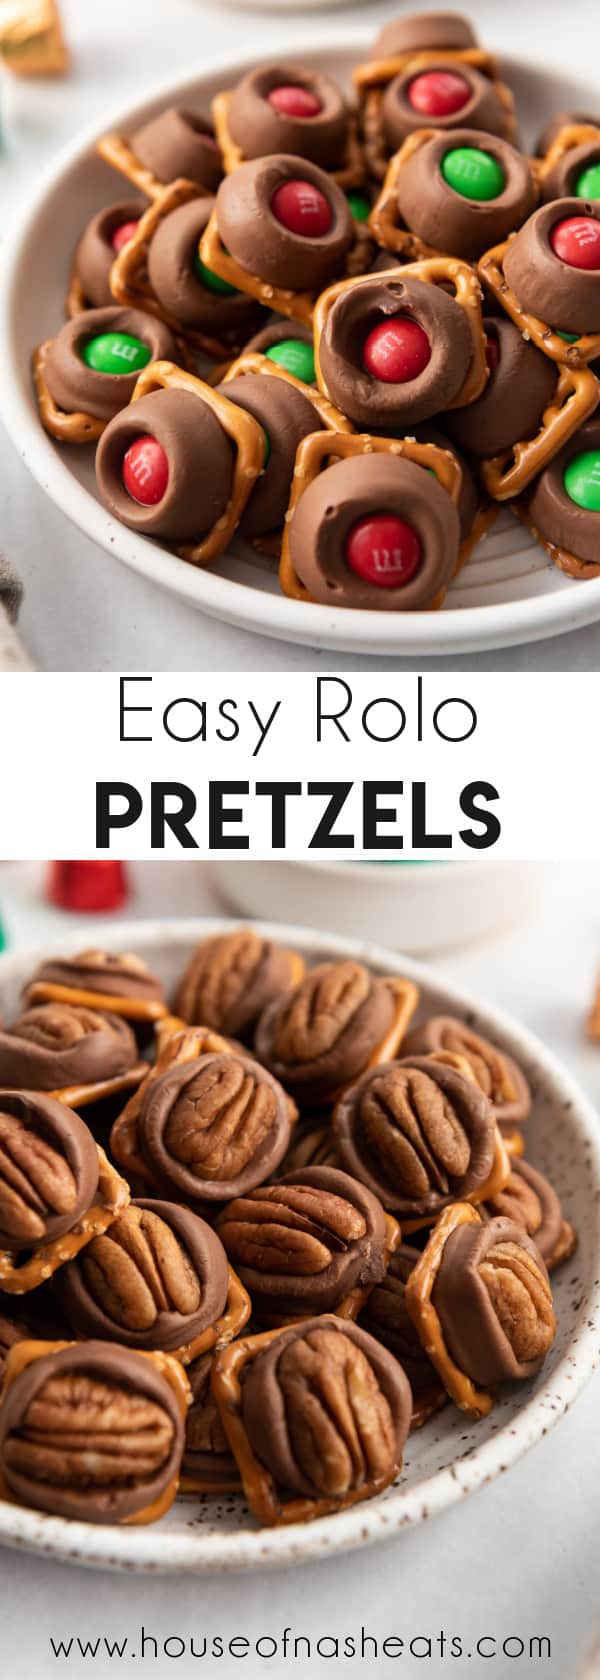 A collage of images of Rolo pretzels made with Christmas M&Ms and whole toasted pecans.